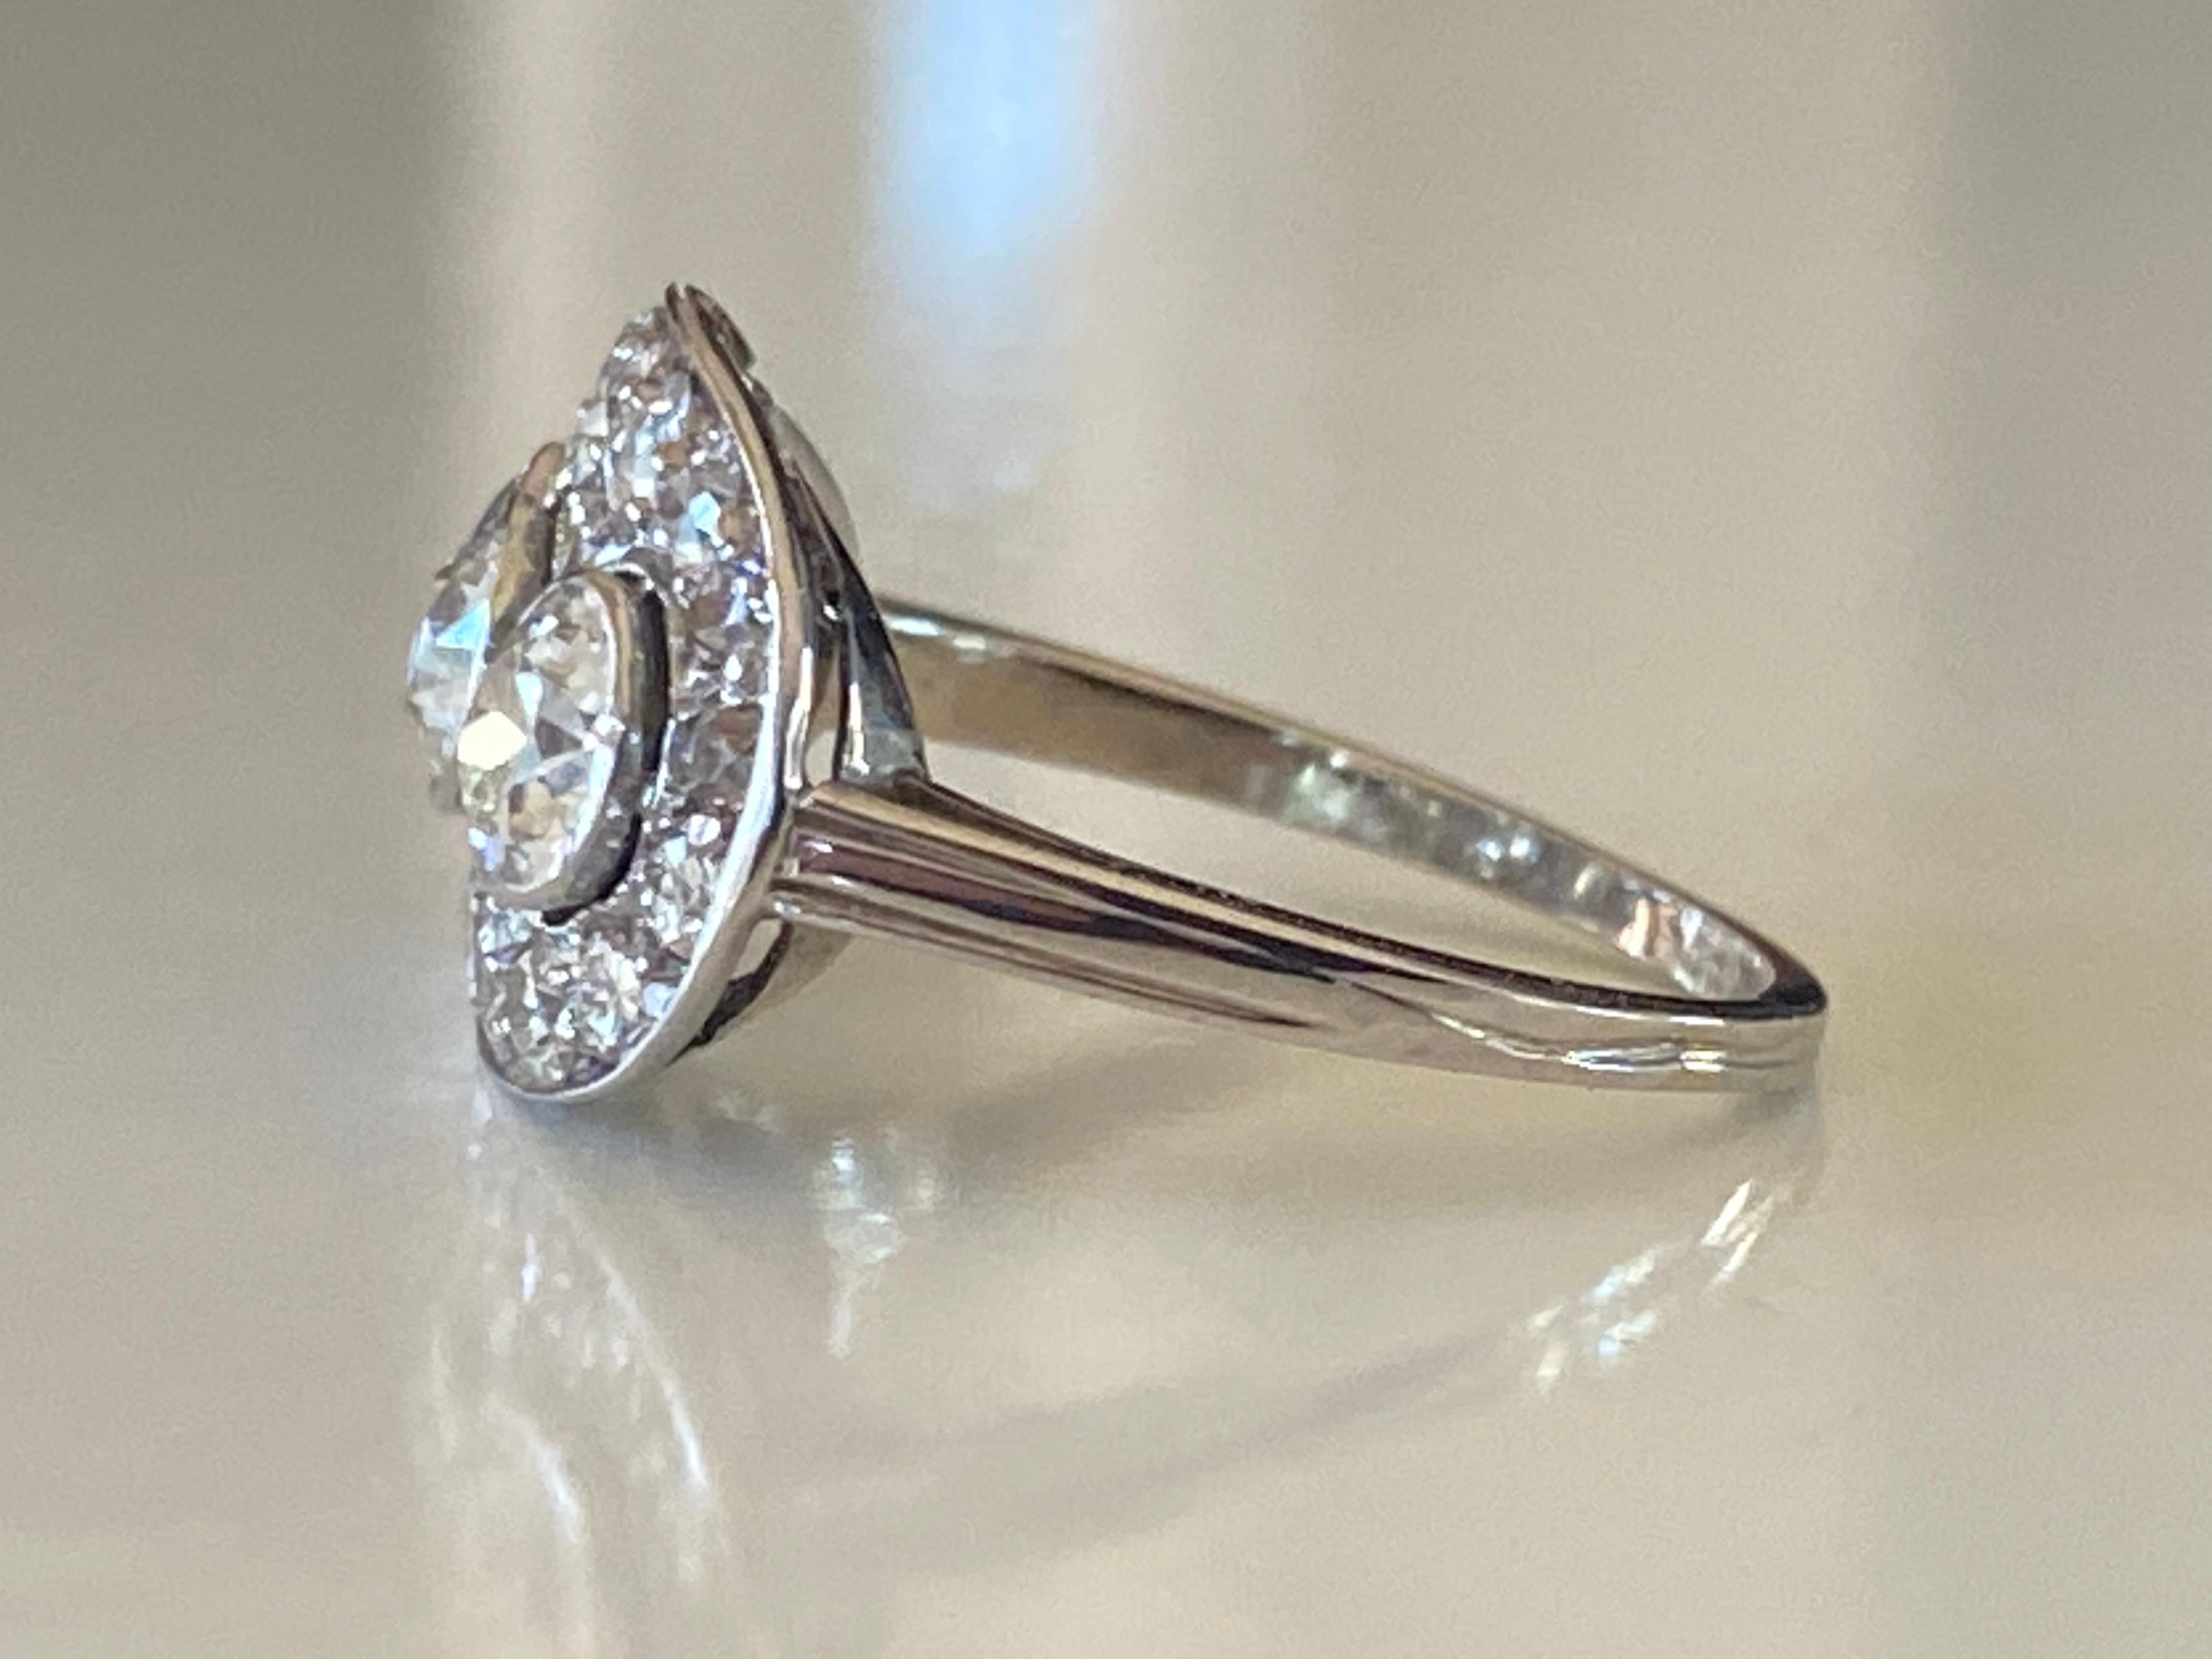 Crafted in the 1930s in platinum, this glistening Art Deco ring features three Old European cut bezel-set diamonds (totaling approximately 1.25 carats, 
G-H color, VS-SI clarity) surrounded by eighteen smaller Old European cut diamonds (totaling